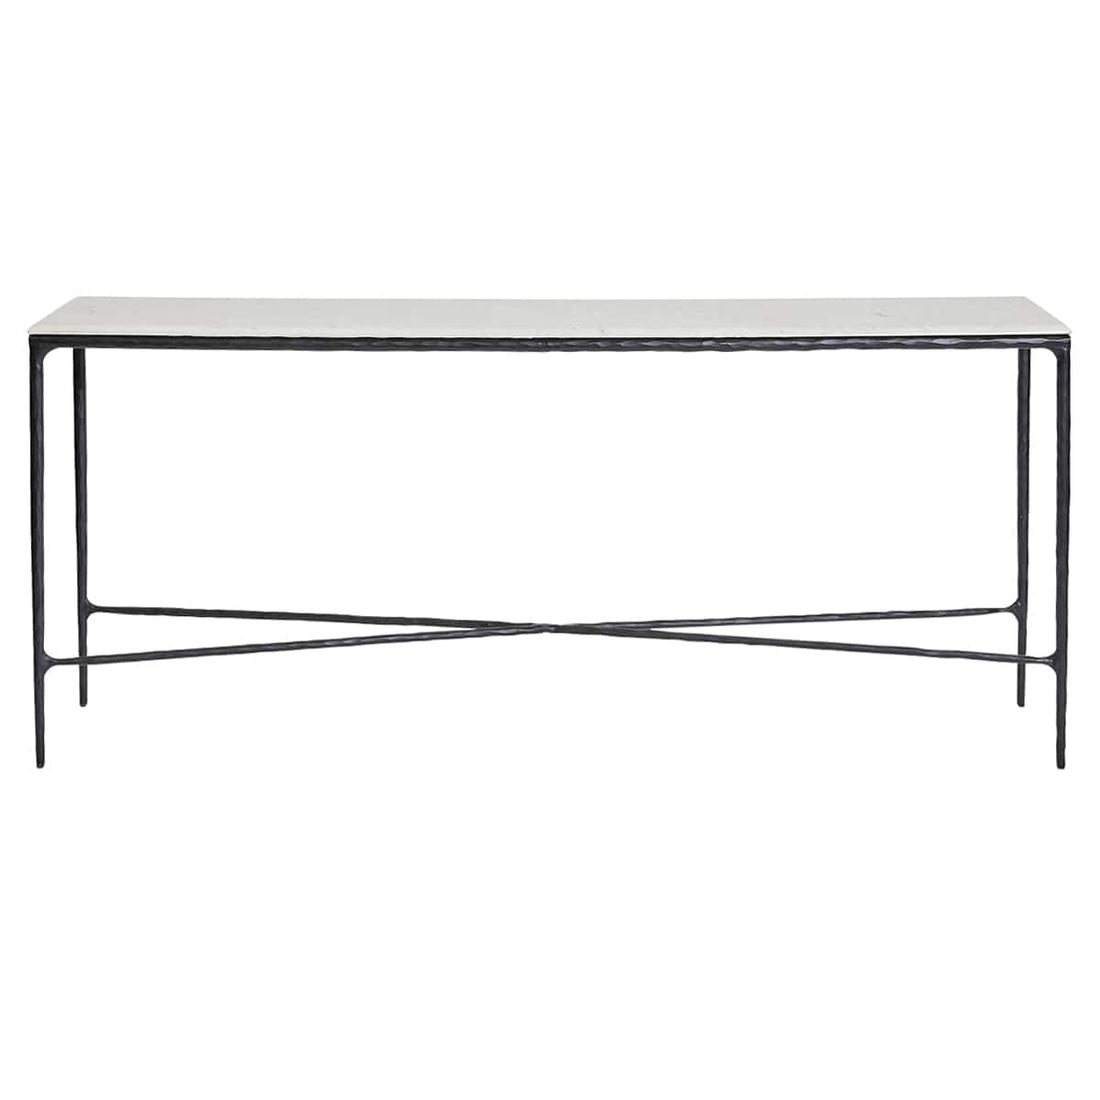 Cafe Lighting & Living Heston Marble Console Table - Large Black